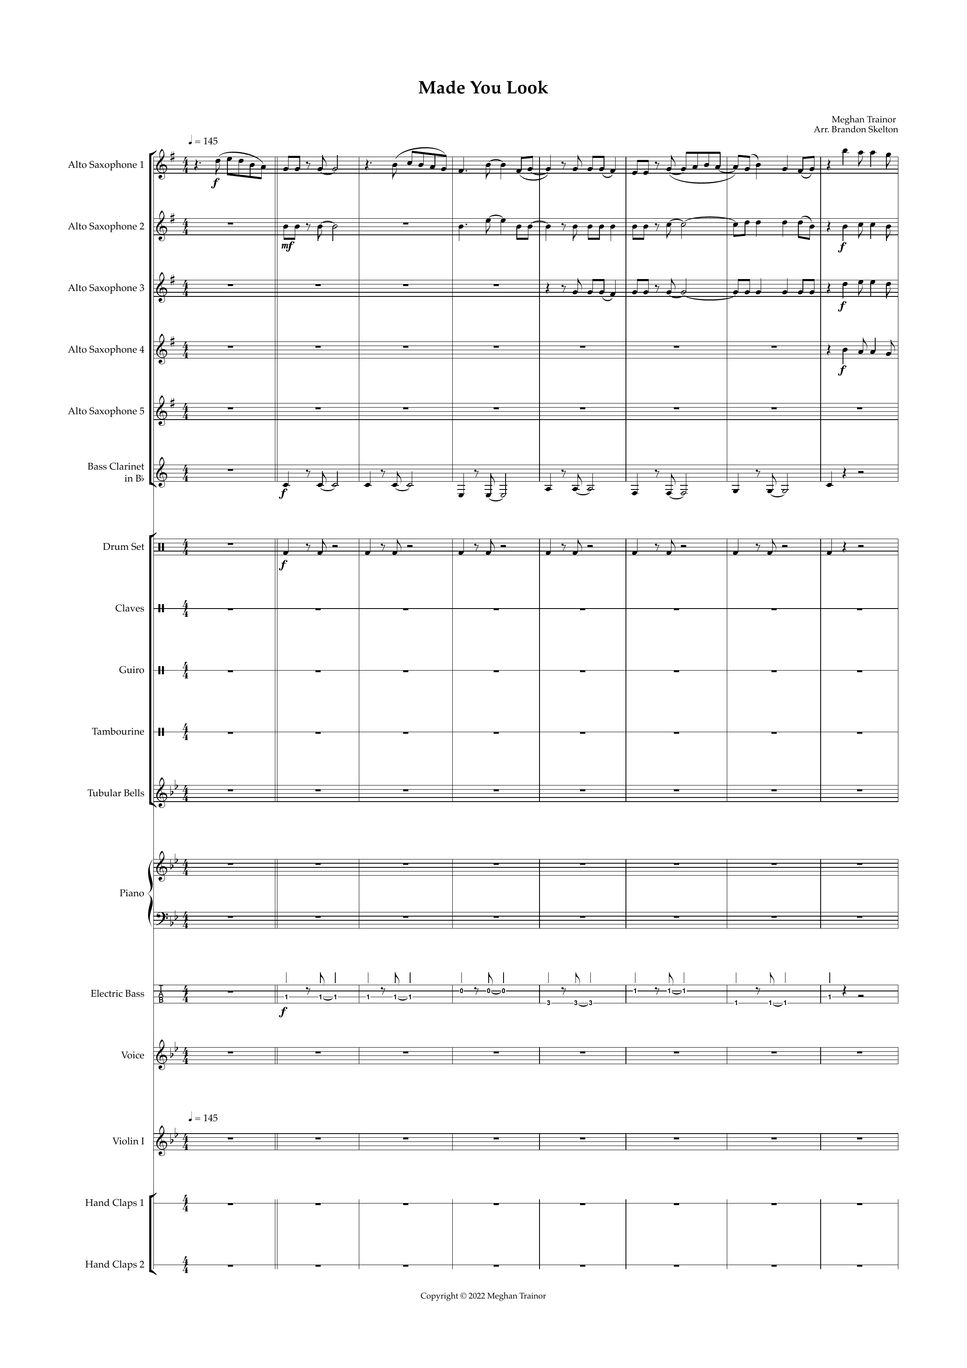 Meghan Trainor - Made You Look (Parts) Sheets by Brandon Skelton